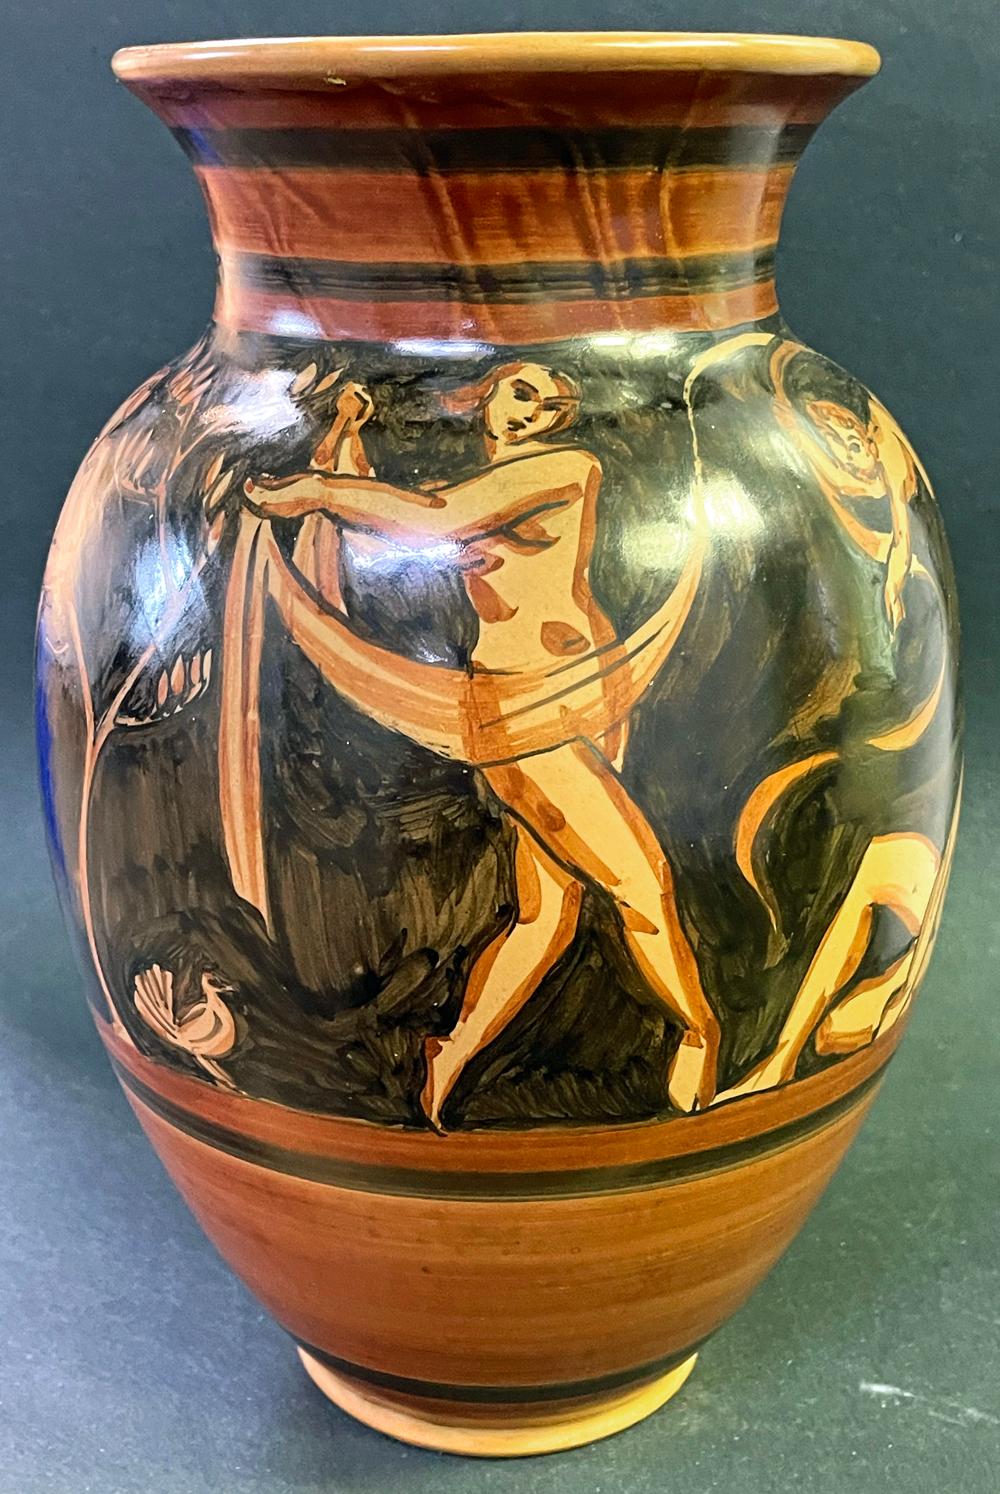 Unique and striking, this Art Deco vase by Arnold Zahner for Rheinfelden, an old Swiss ceramics firm, depicts a frieze of nude figures enjoying the pleasures of pastoral life.  A Pan-like male figure playing the flute is prominent, as is a female